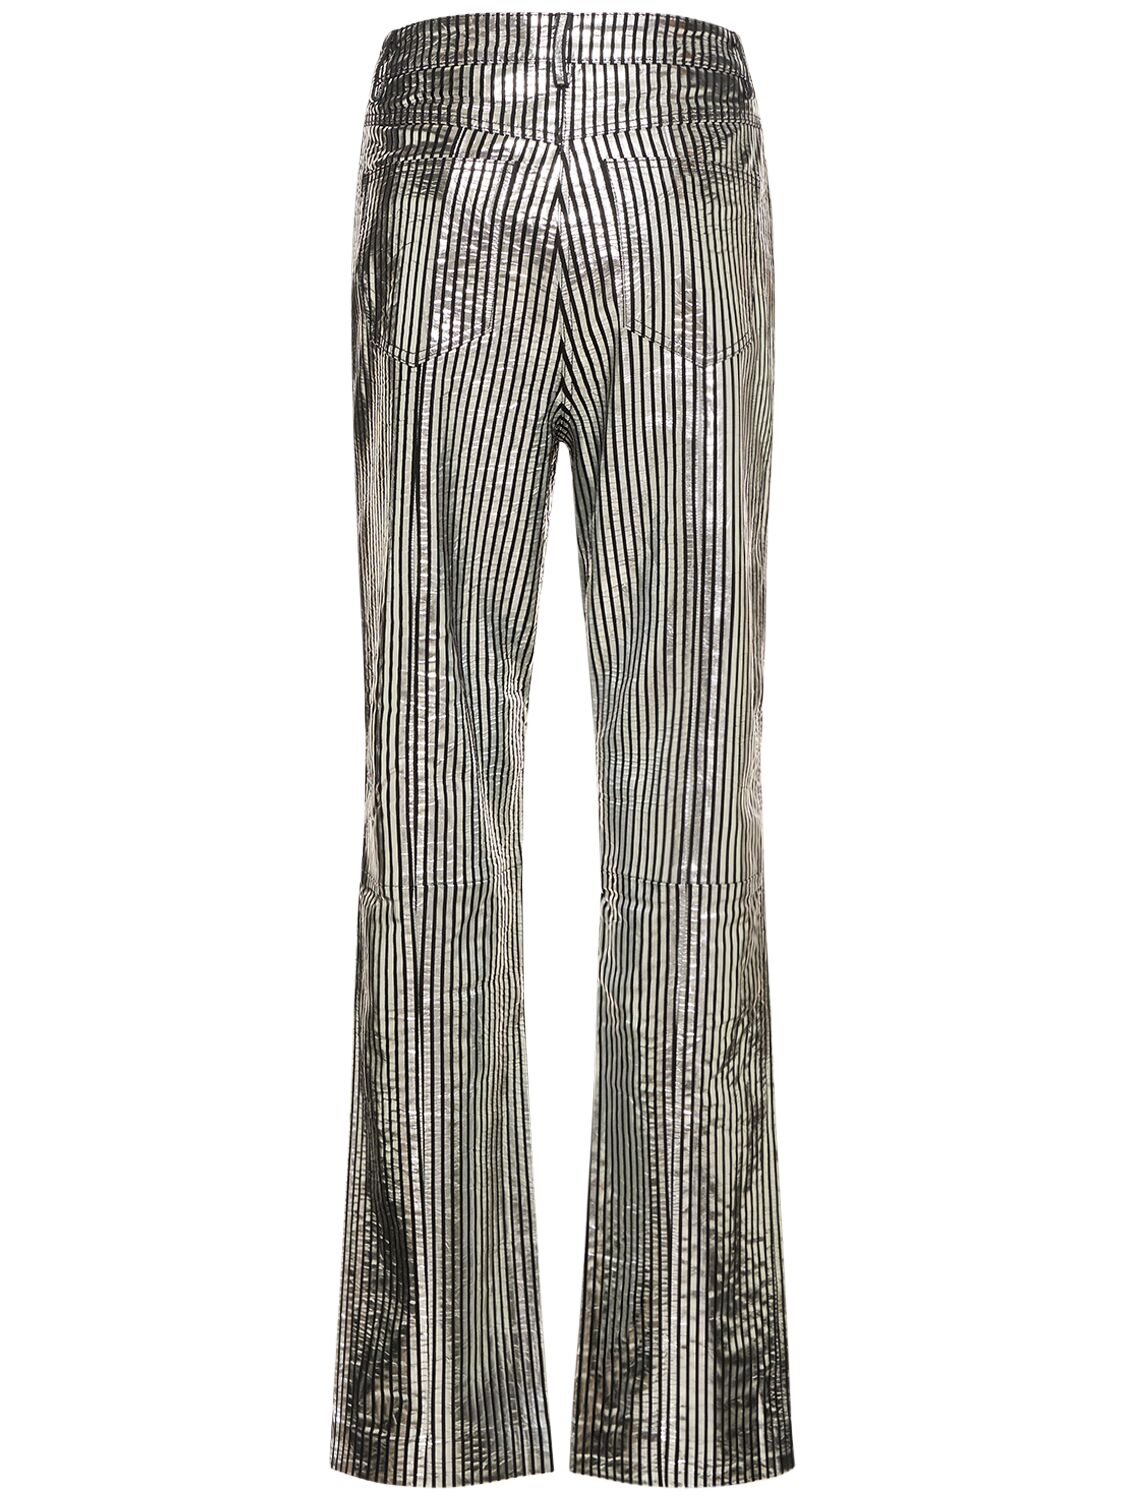 Shop Remain Striped Leather Pants In Black Comb.